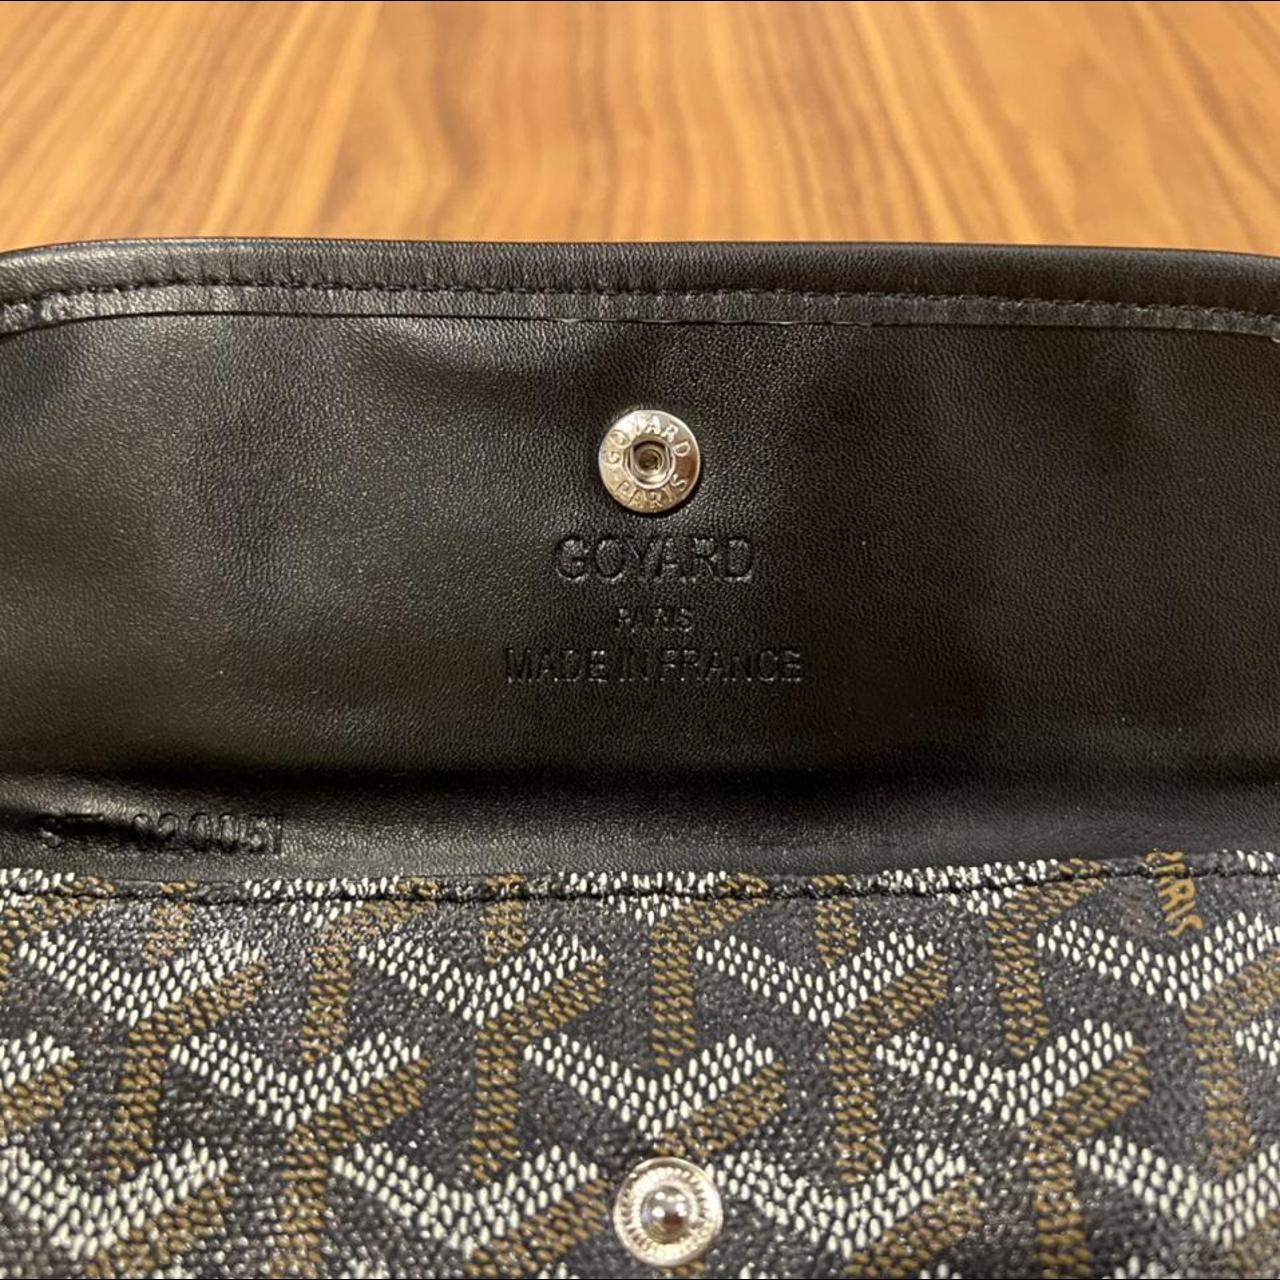 Goyard pouch (work as wallet too) Overall - Depop